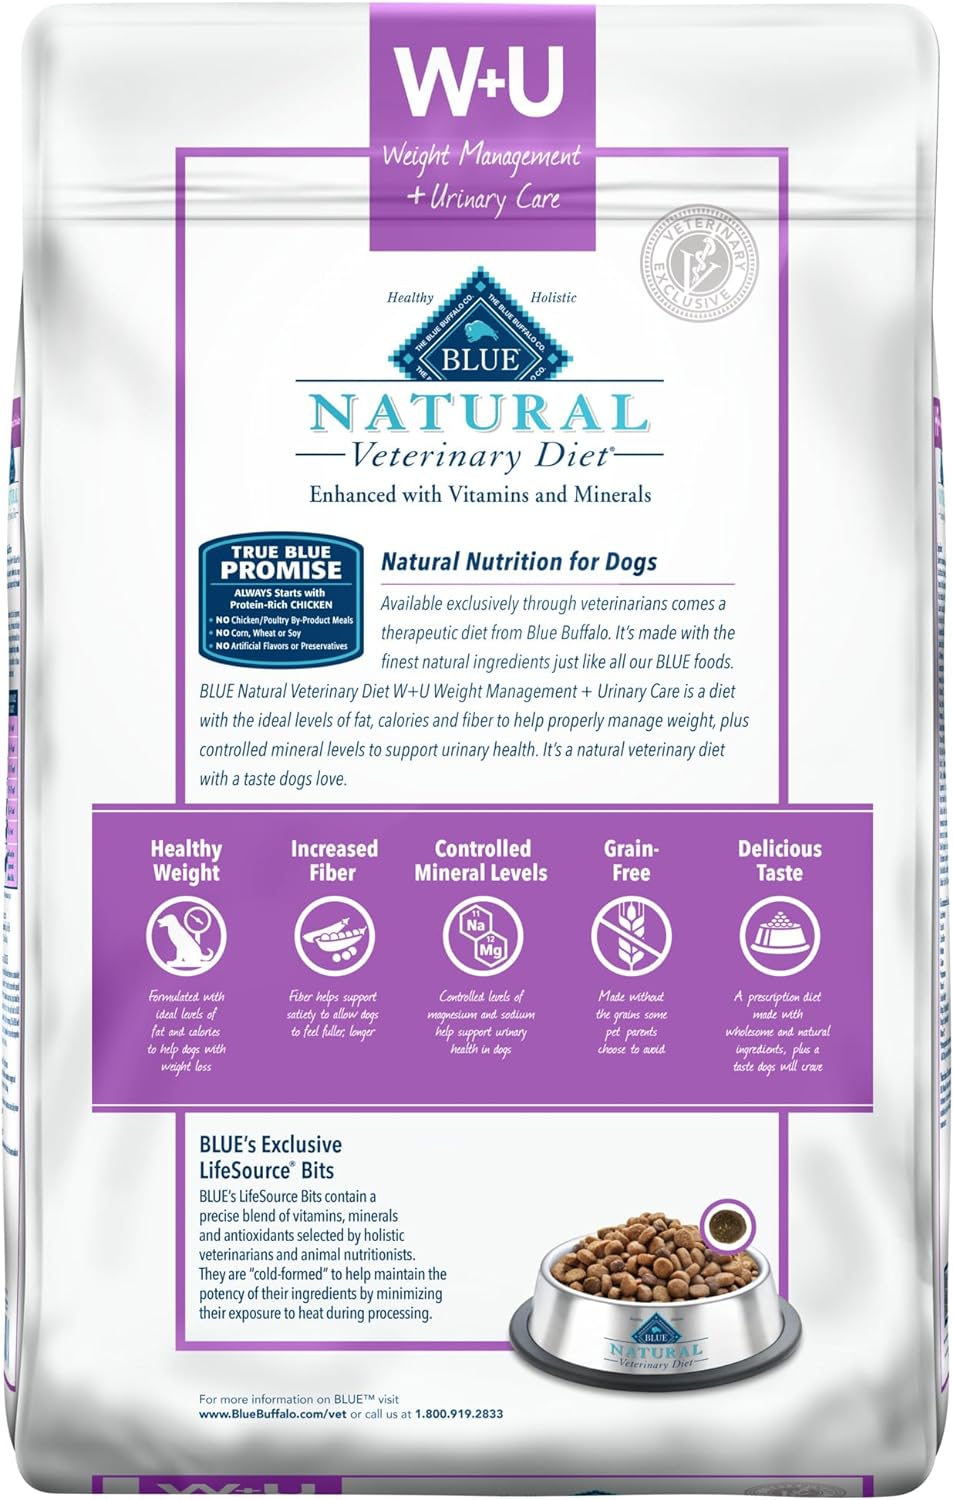 Blue Natural Veterinary Diet W+U Weight Management + Urinary Care Dry Dog Food – Gallery Image 2